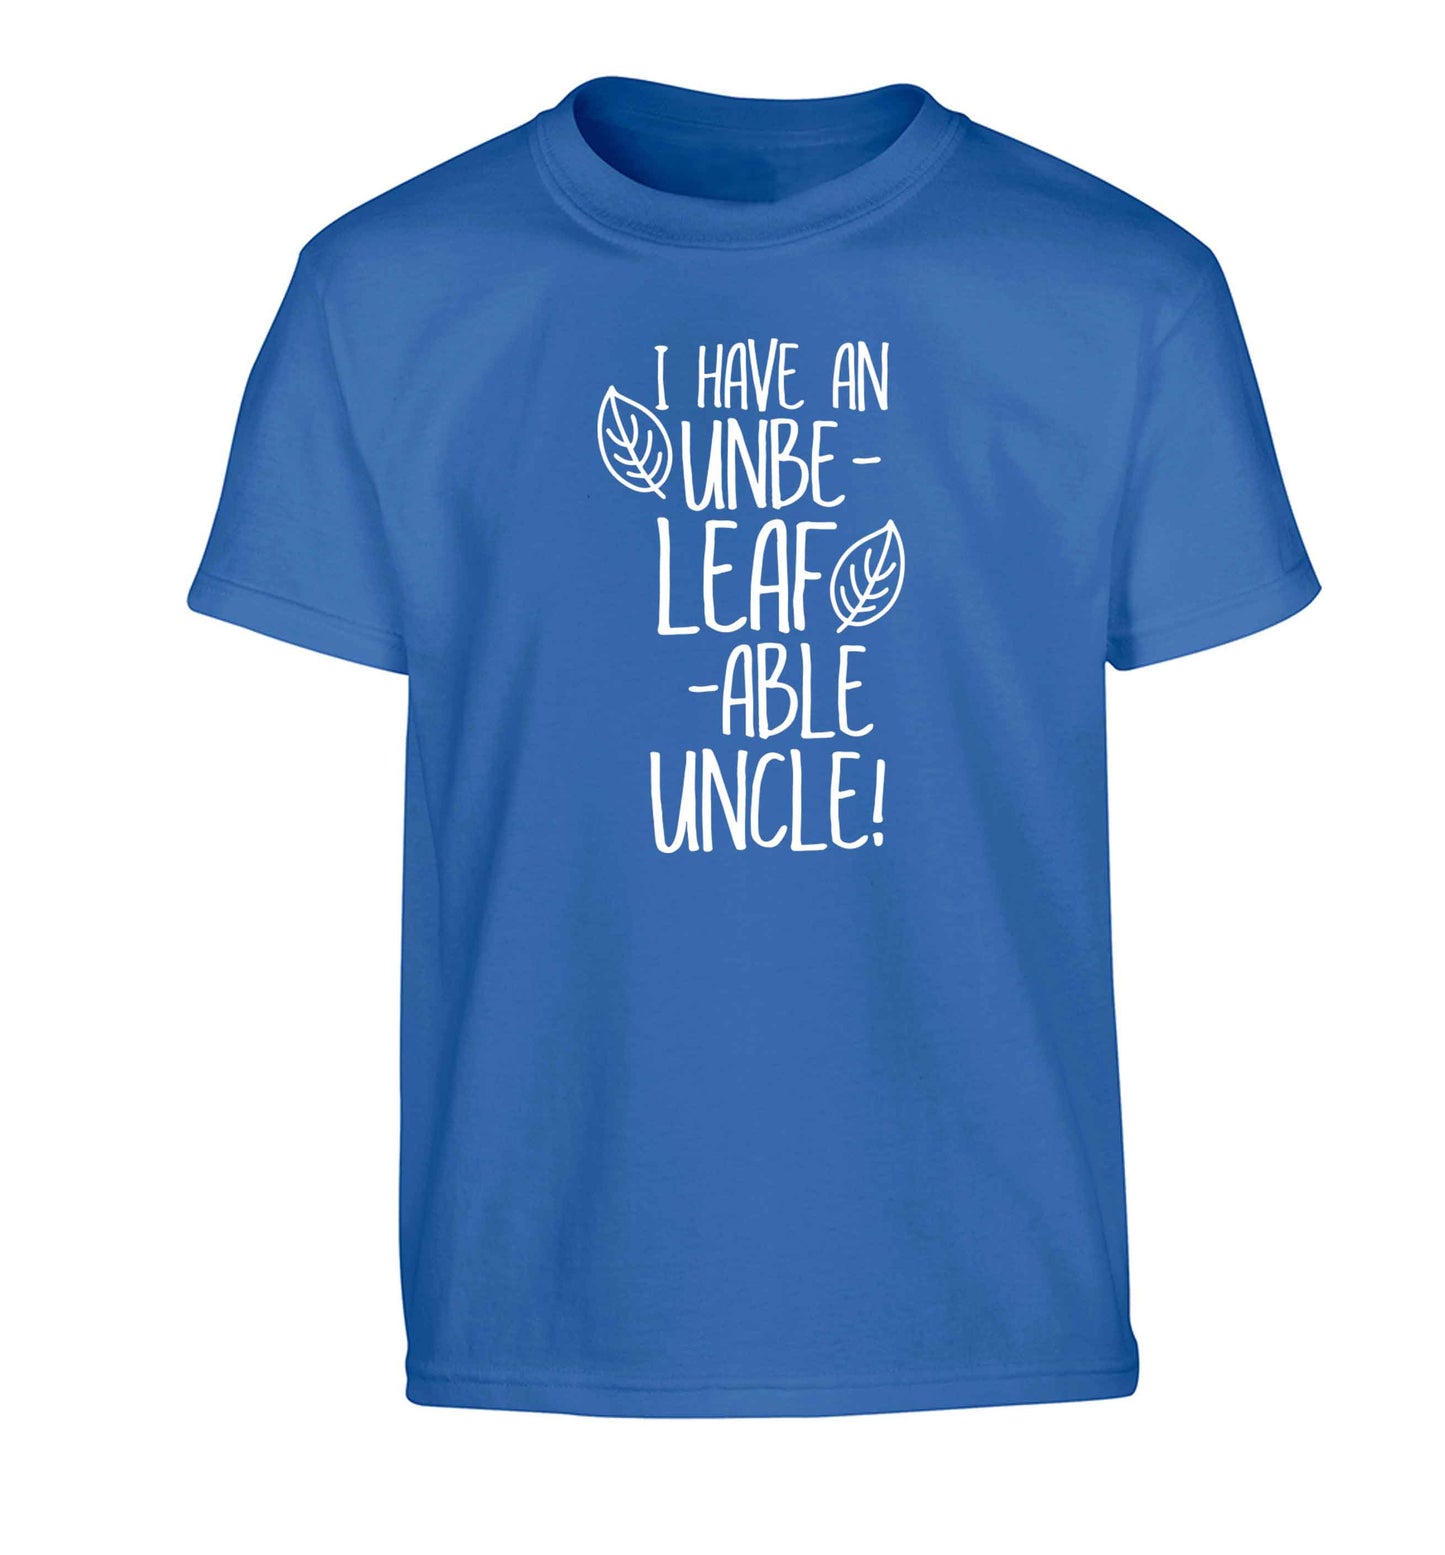 I have an unbe-leaf-able uncle Children's blue Tshirt 12-13 Years